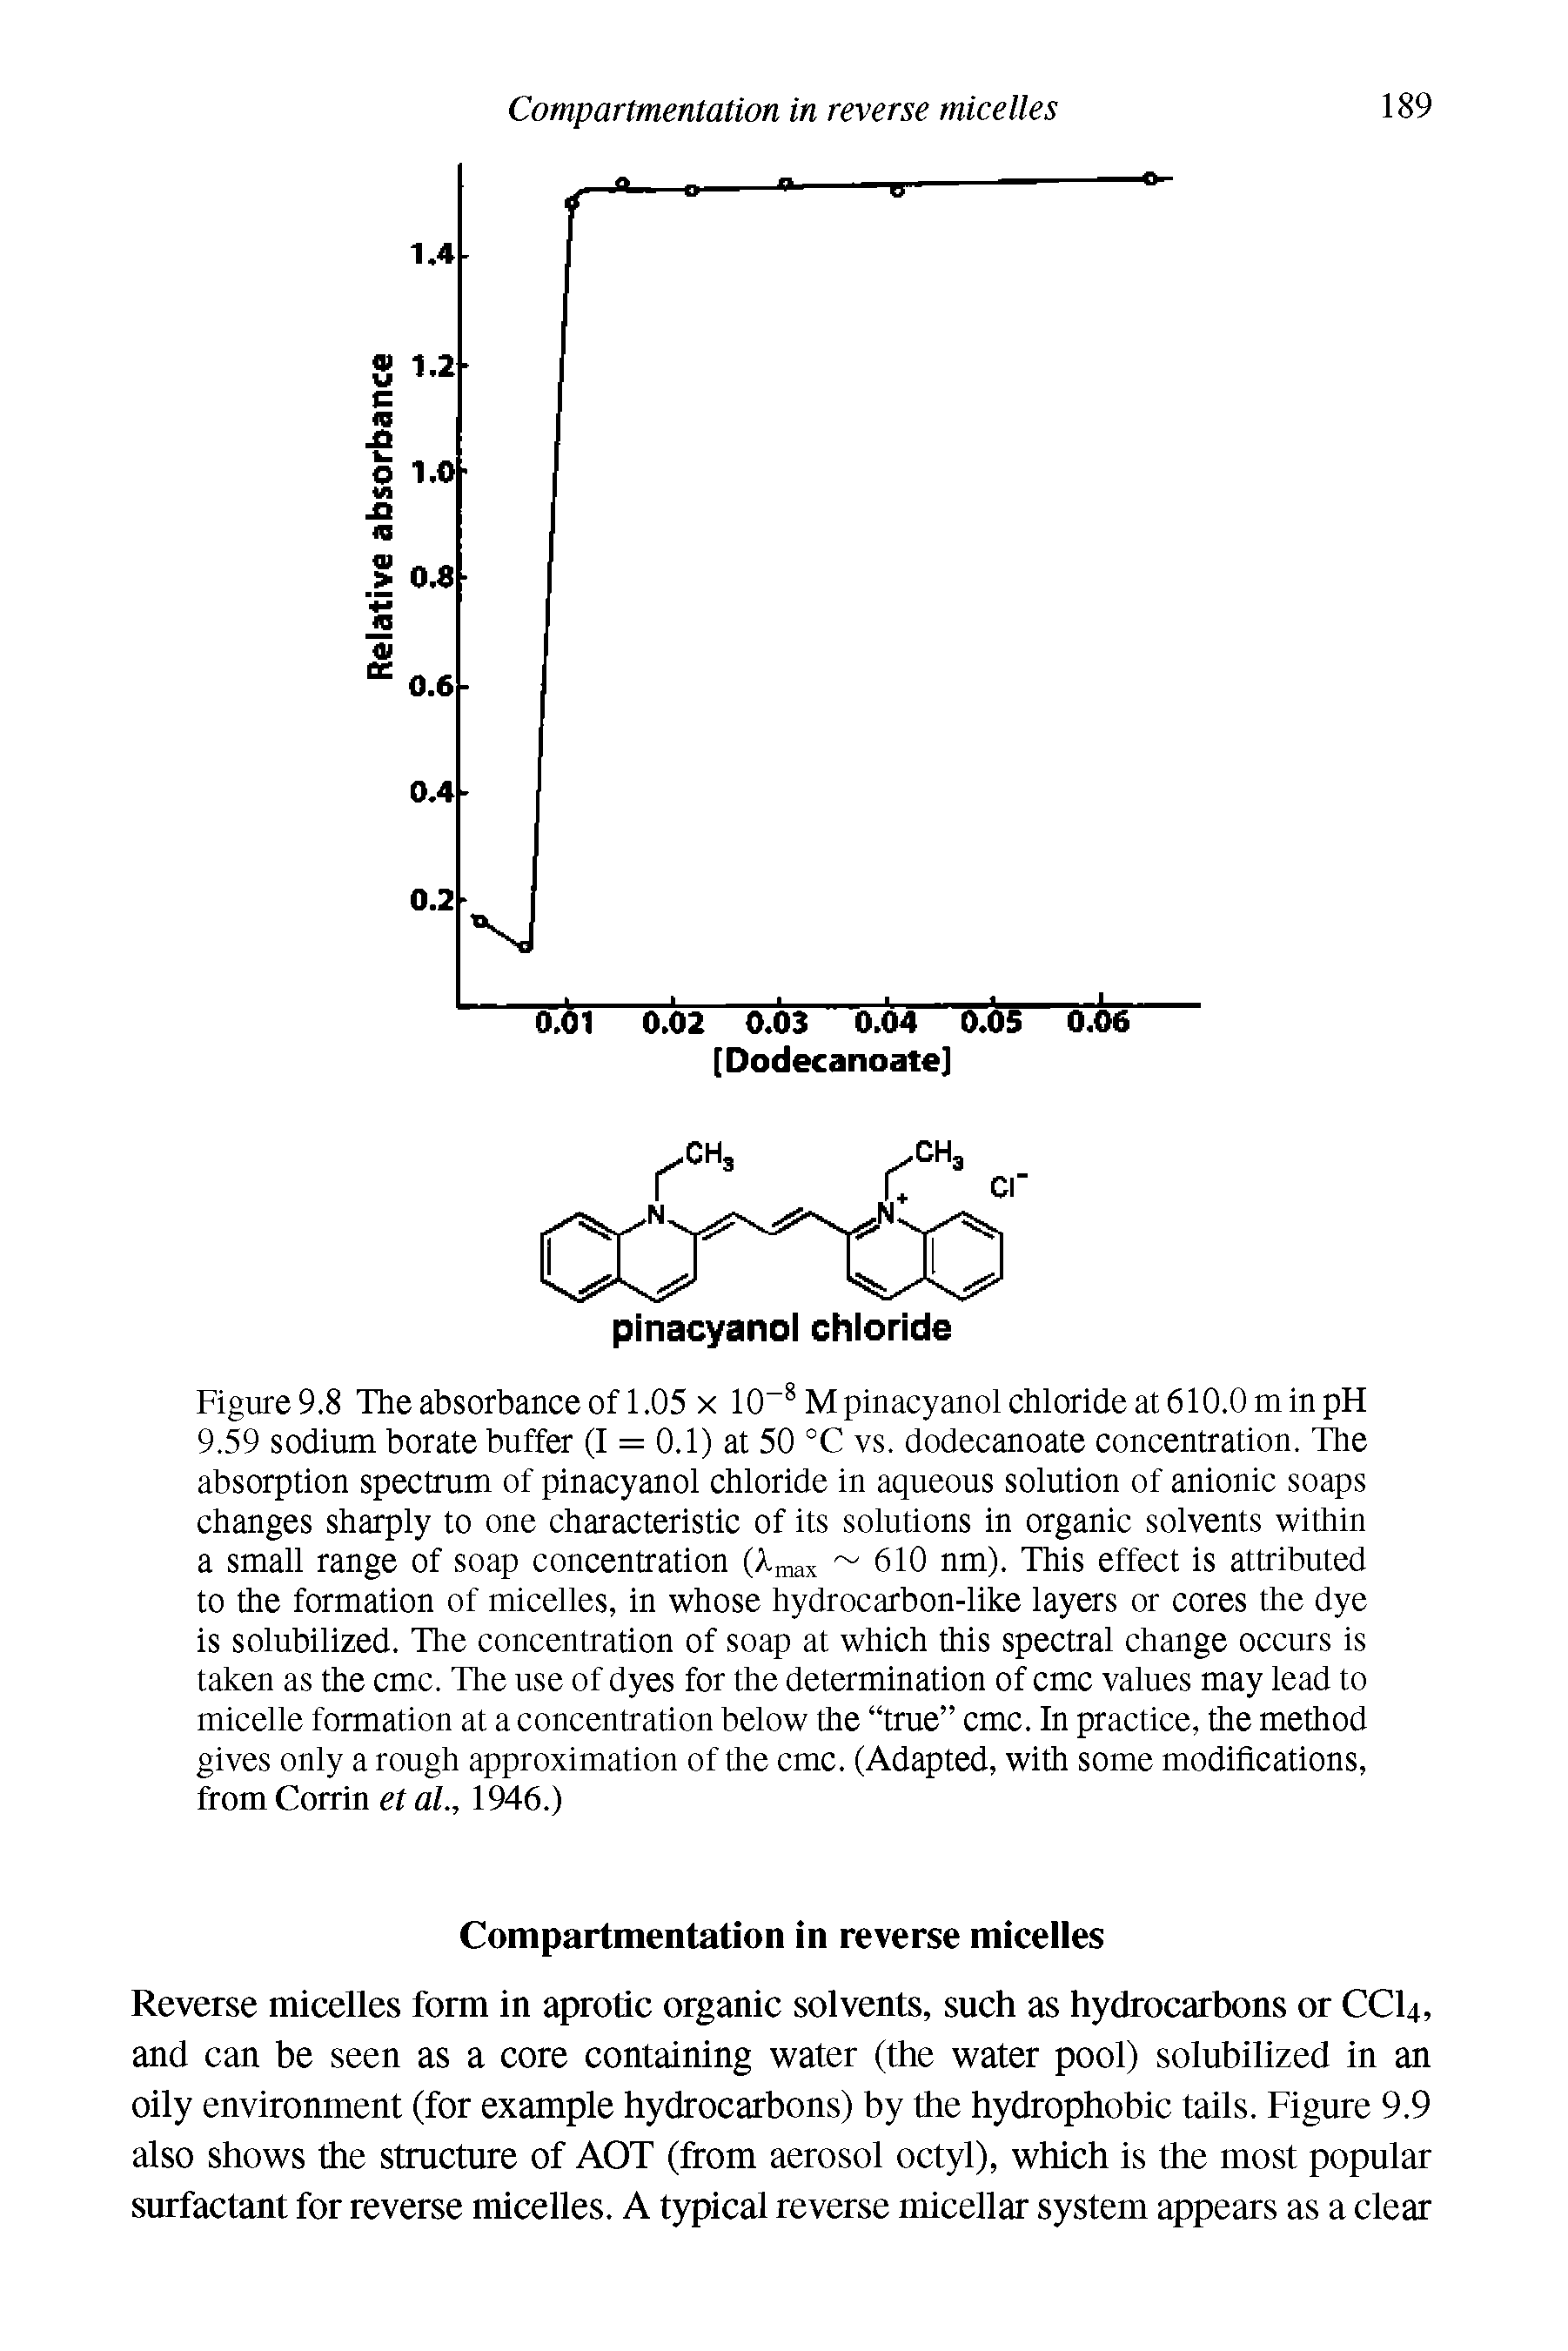 Figure9.8 The absorbance of 1.05 x 10 M pinacyanol chloride at 610.0 min pH 9.59 sodium borate buffer (I = 0.1) at 50 °C vs. dodecanoate concentration. The absorption spectrum of pinacyanol chloride in aqueous solution of anionic soaps changes sharply to one characteristic of its solutions in organic solvents within a small range of soap concentration (X ax 610 nm). This effect is attributed to the formation of micelles, in whose hydrocarbon-like layers or cores the dye is solubilized. The concentration of soap at which this spectral change occurs is taken as the cmc. The use of dyes for the determination of cmc values may lead to micelle formation at a concentration below the true cmc. In practice, the method gives only a rough approximation of the cmc. (Adapted, with some modifications, from Corrin et al., 1946.)...